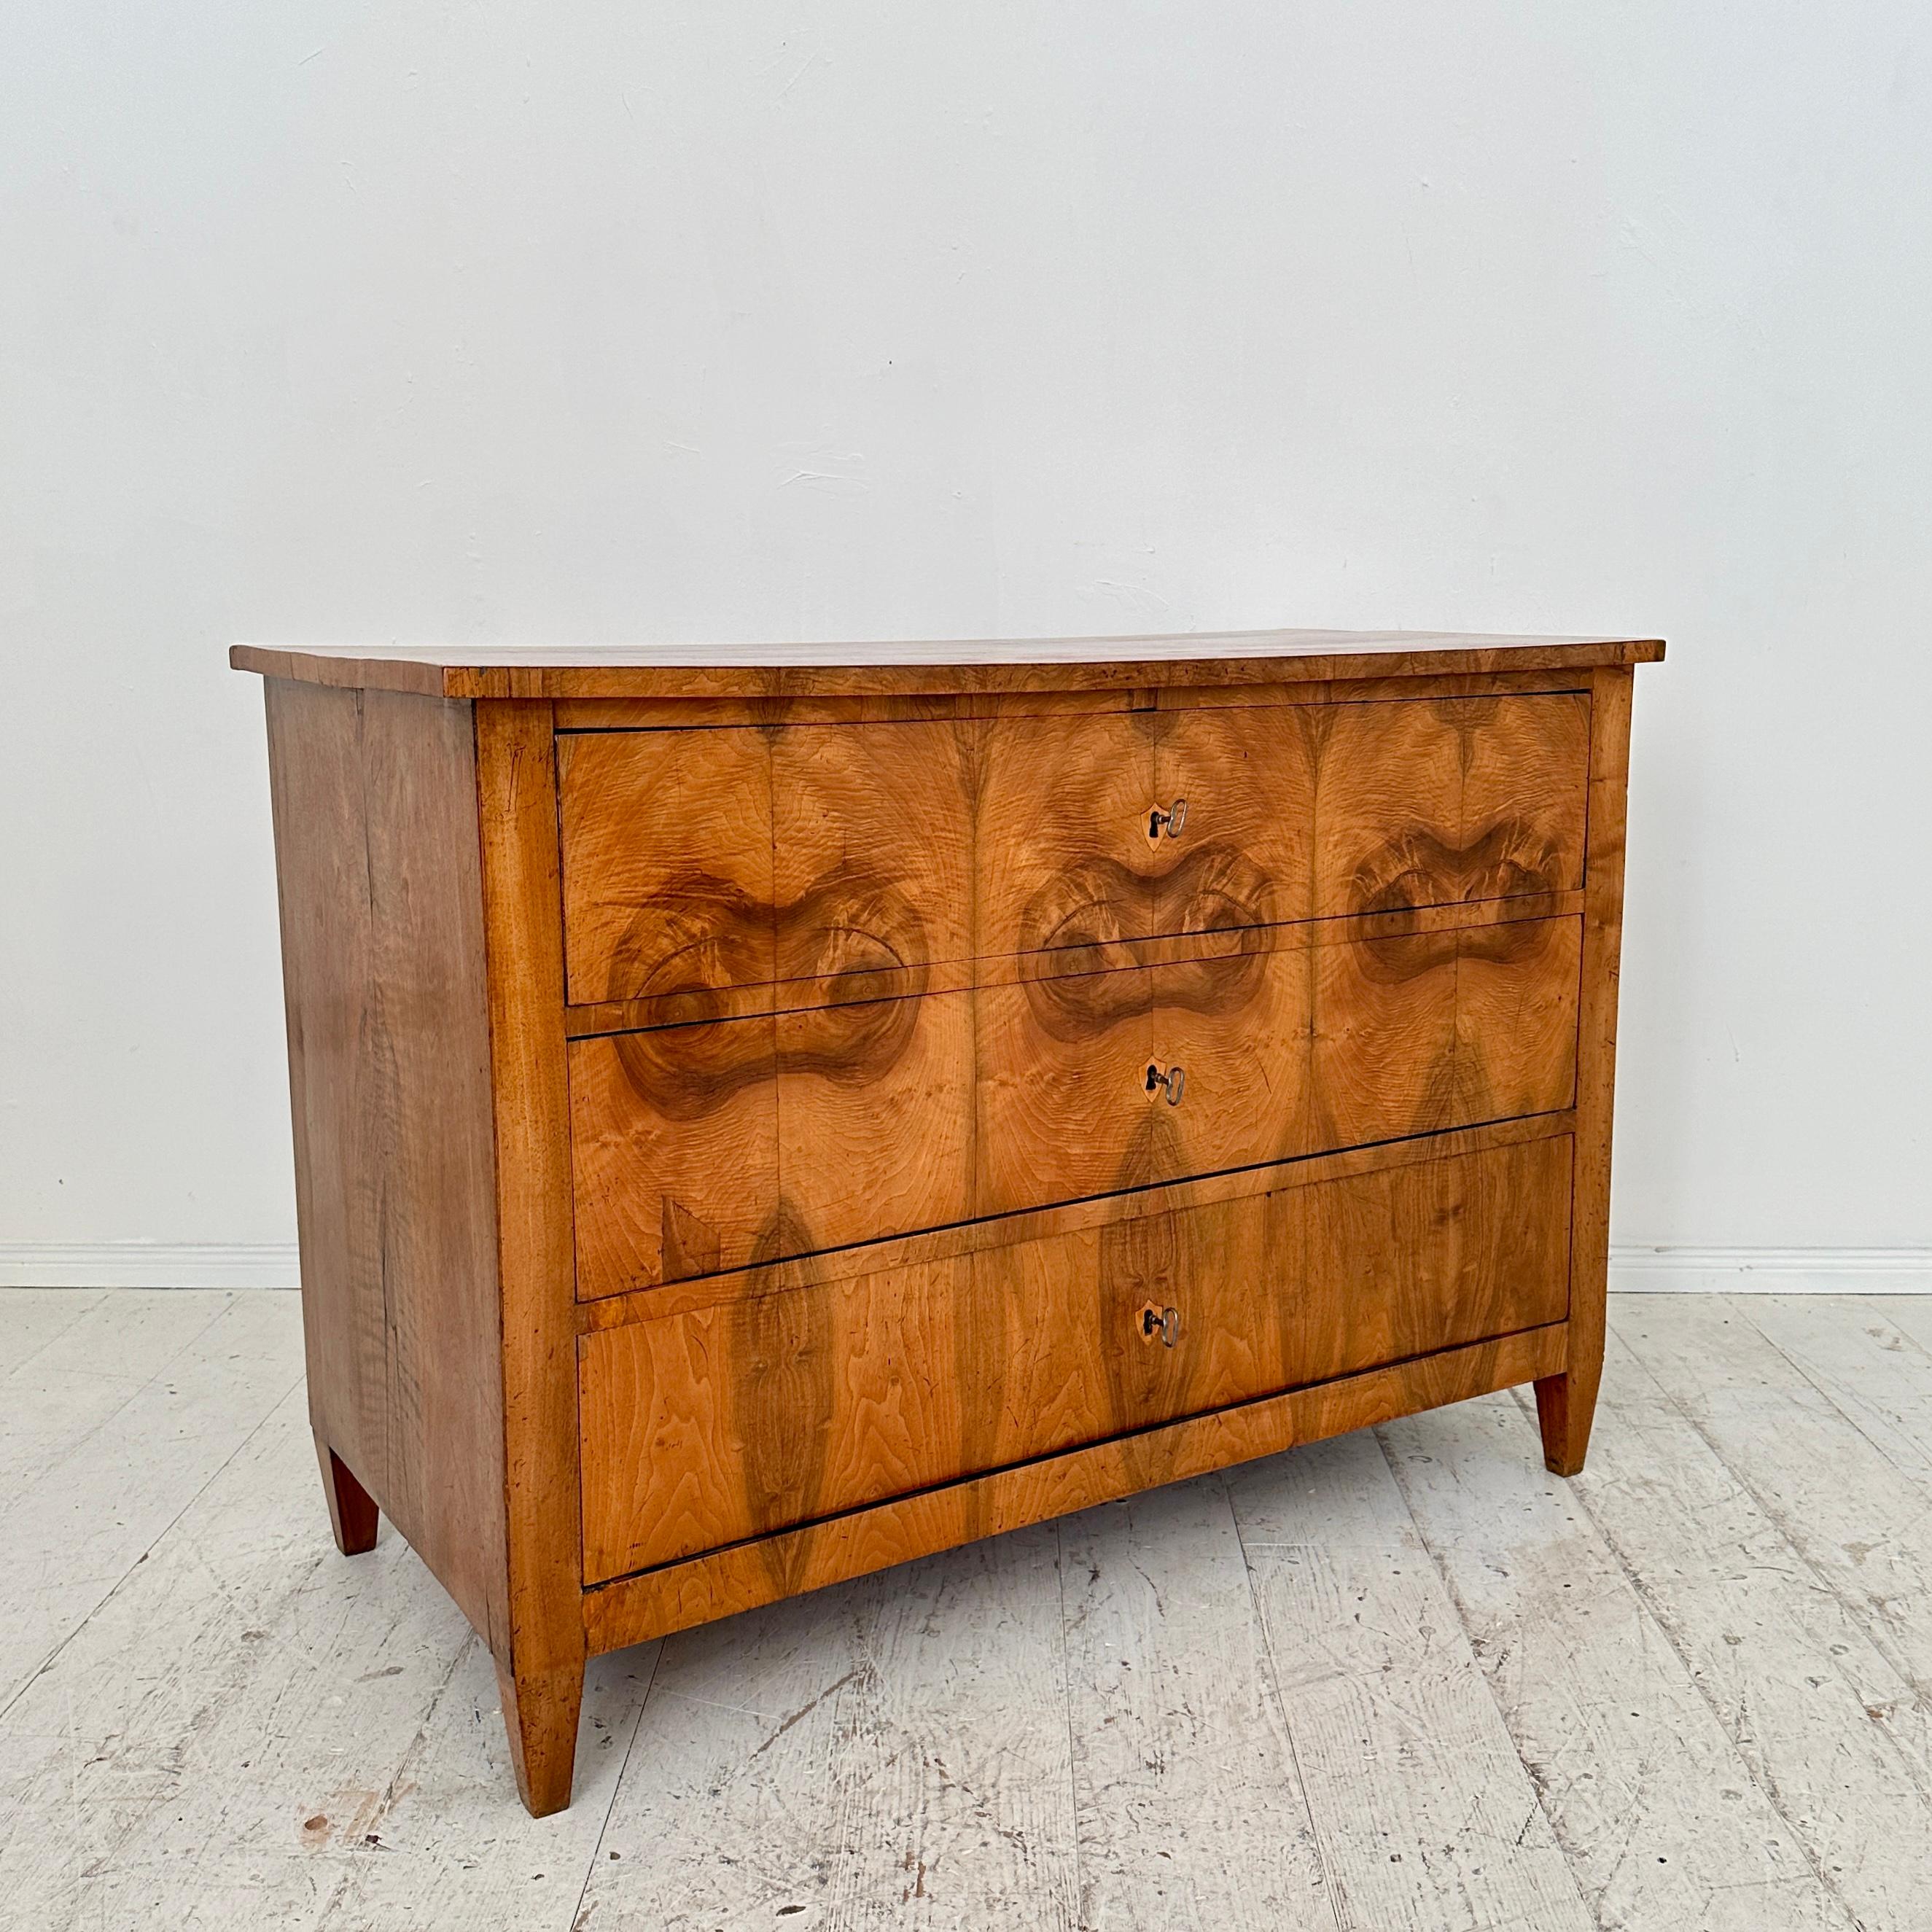 19th Century German Biedermeier Chest of Drawers in Walnut with 3 Drawers, 1820 For Sale 10